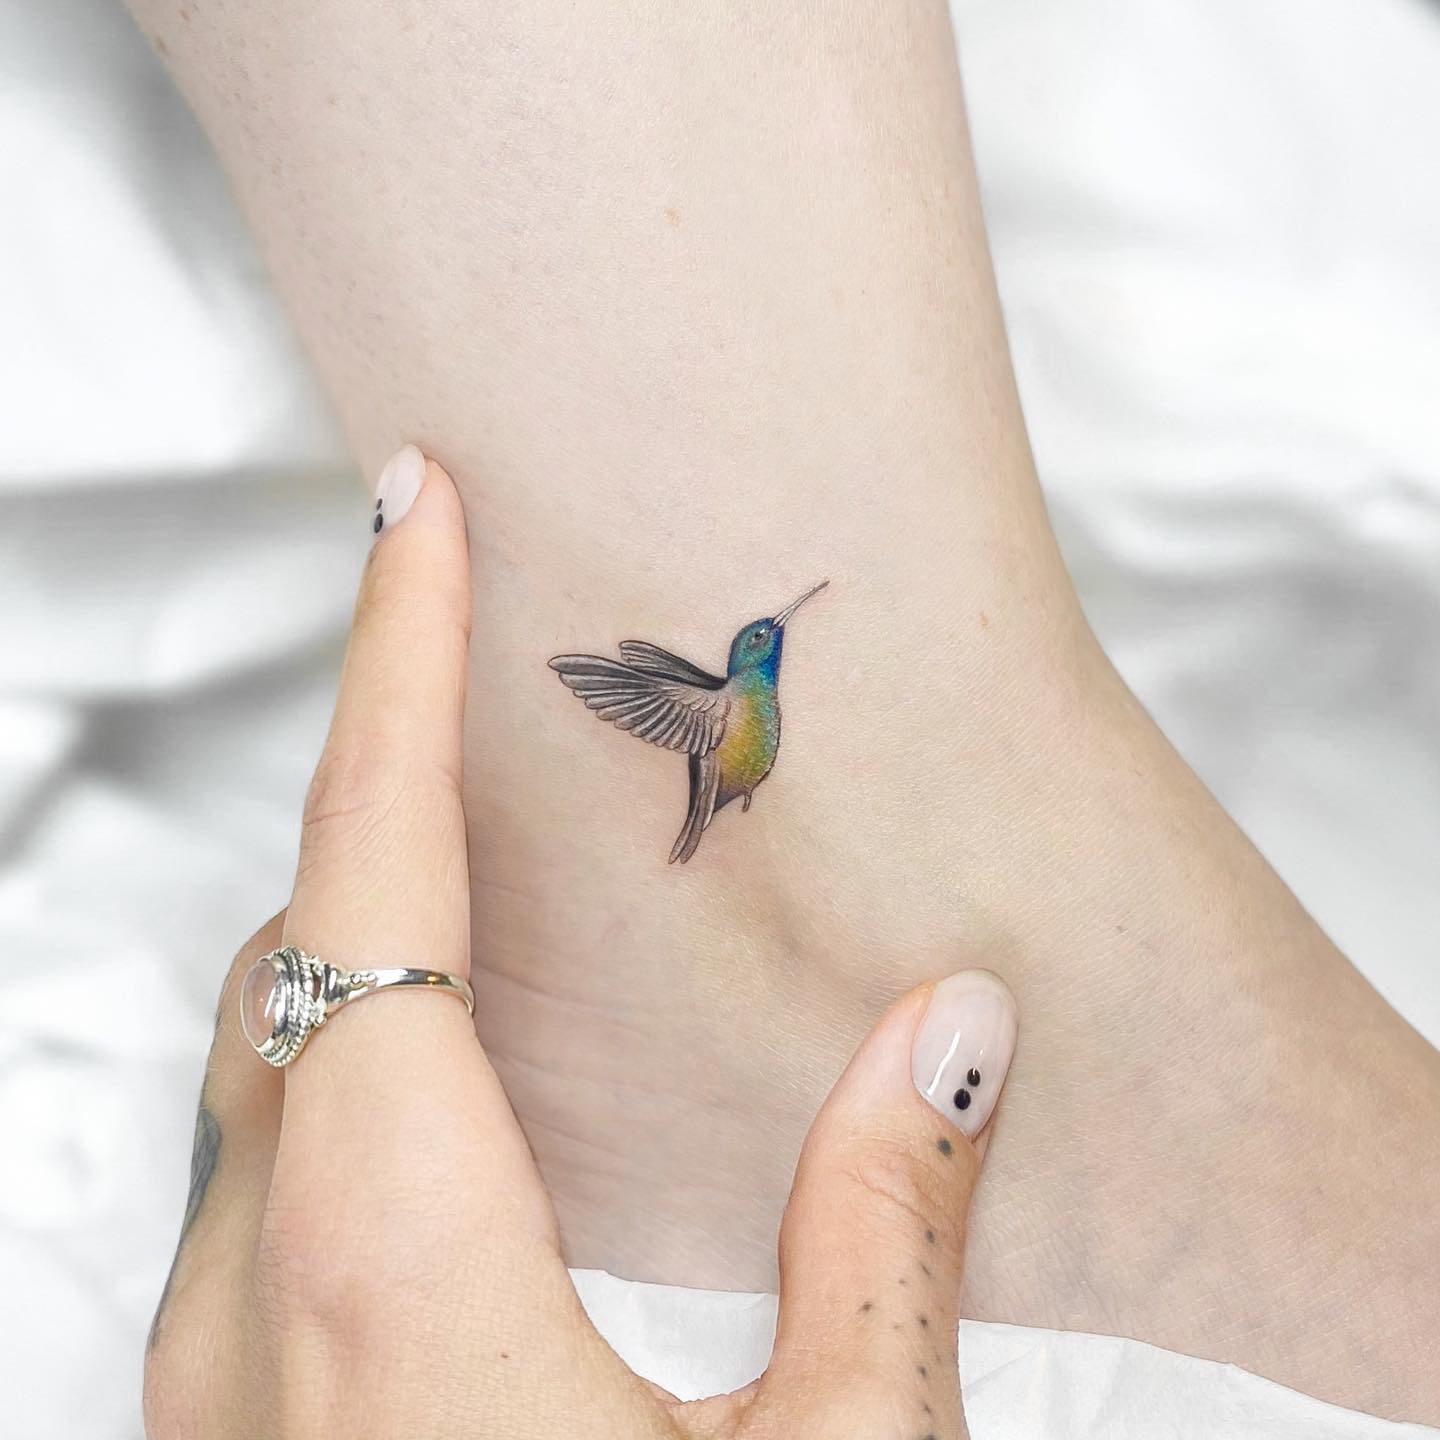 Small Colorful Hummingbird Tattoo on Ankle